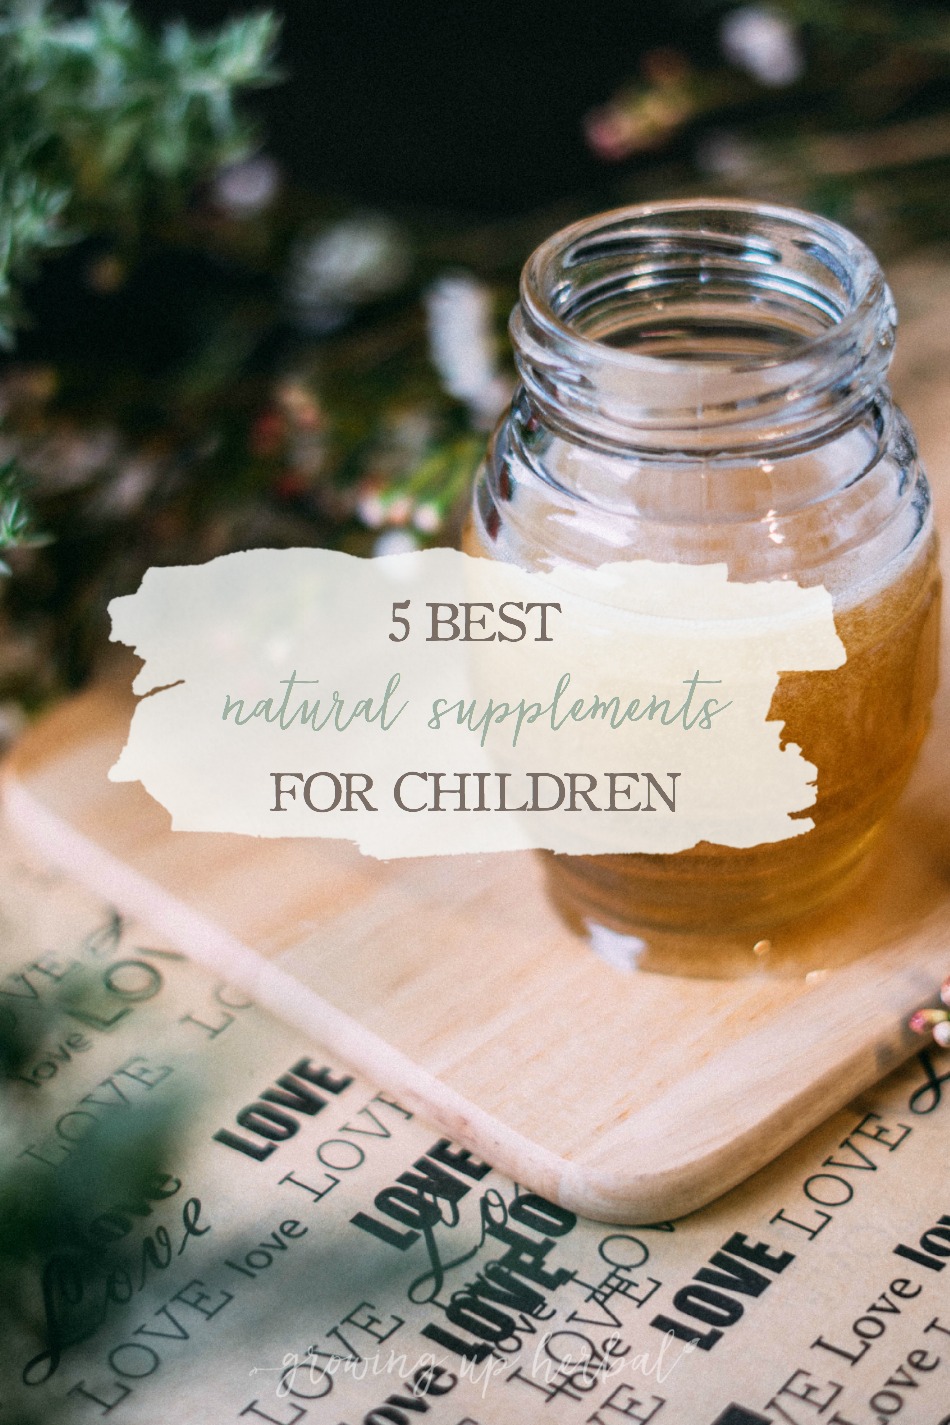 5 Best Natural Supplements For Children | Growing Up Herbal | Ever wondered which supplements you should be giving your kids? If so, here are 5 of the best to start with!